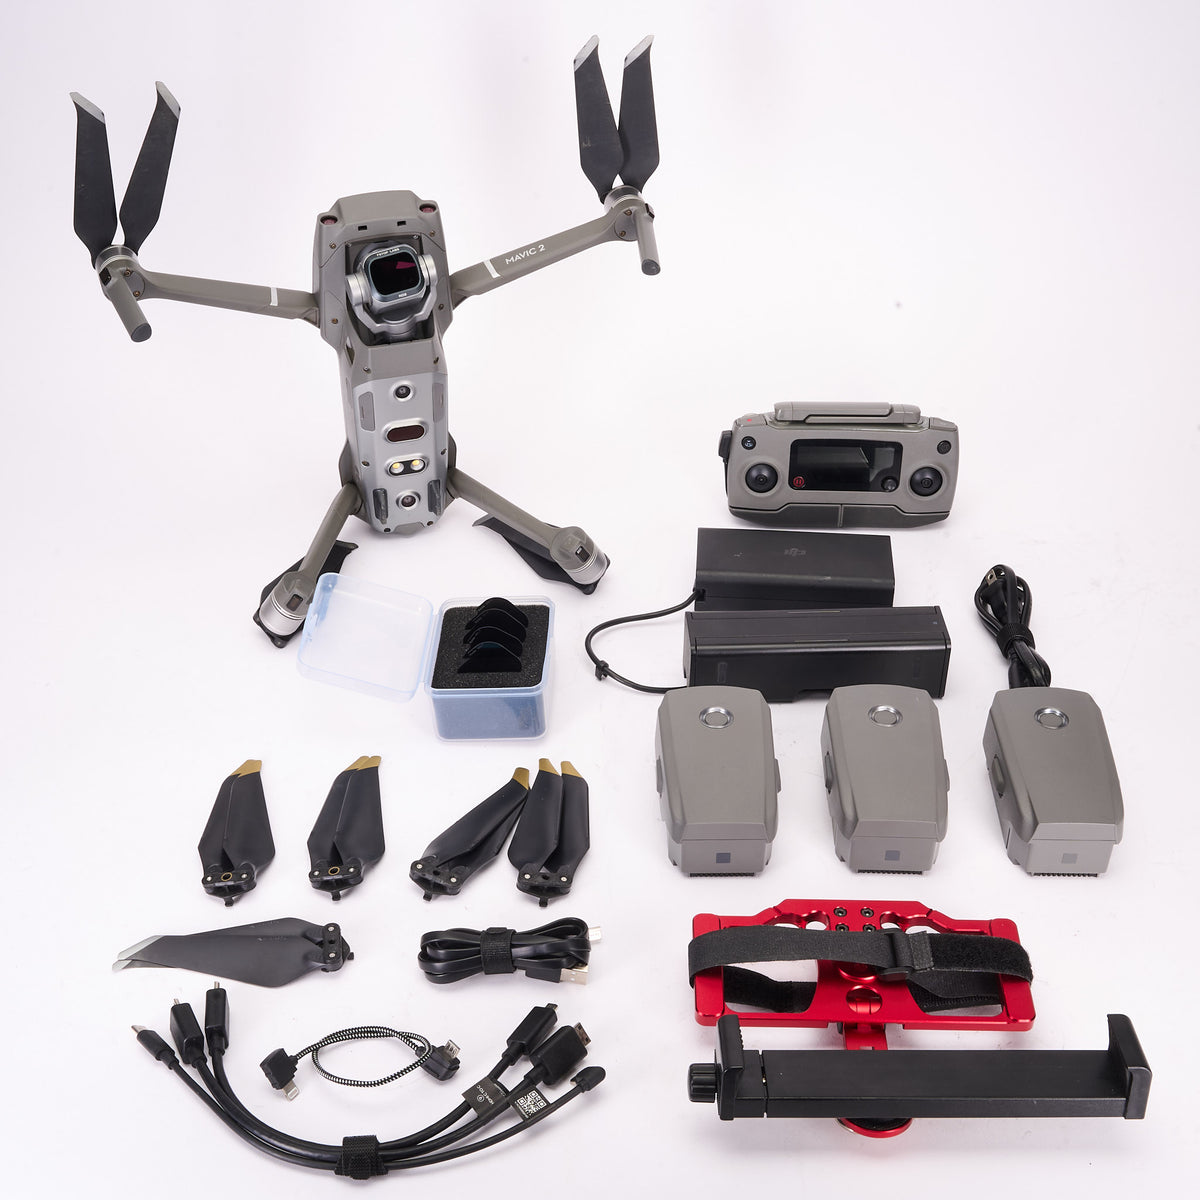 ACC3604 DJI Pro Mavic 2 Kit with Remote Control, ND Filters, Batteries, Accessories, Case 1.jpg